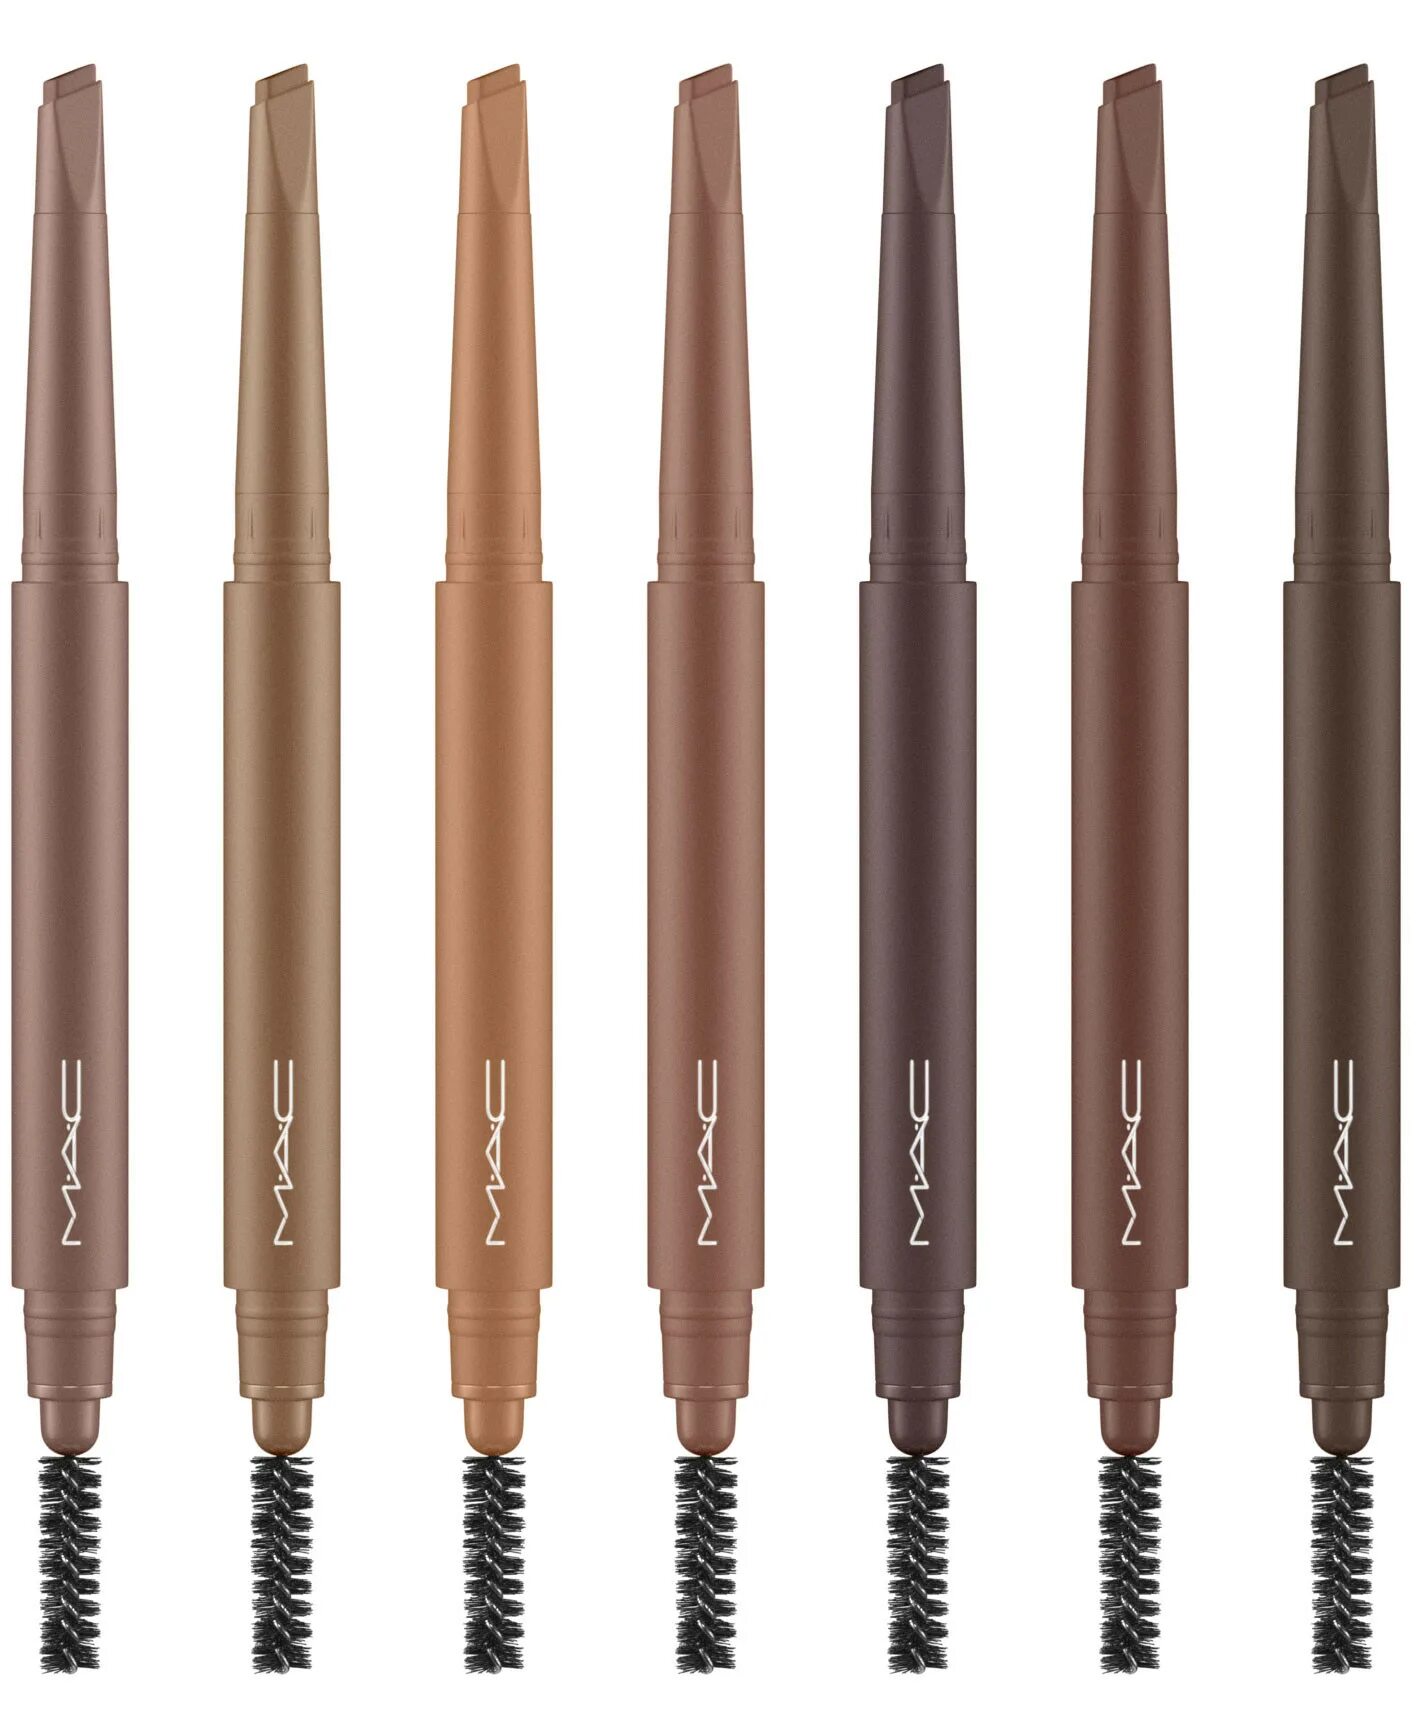 Taupe Veluxe Brow Liner карандаш Mac. Карандаш Mac Eyebrow Pencil. Mac карандаш для бровей Veluxe Brow Taupe. Mac Veluxe Brow Liner палитра. Brow liner